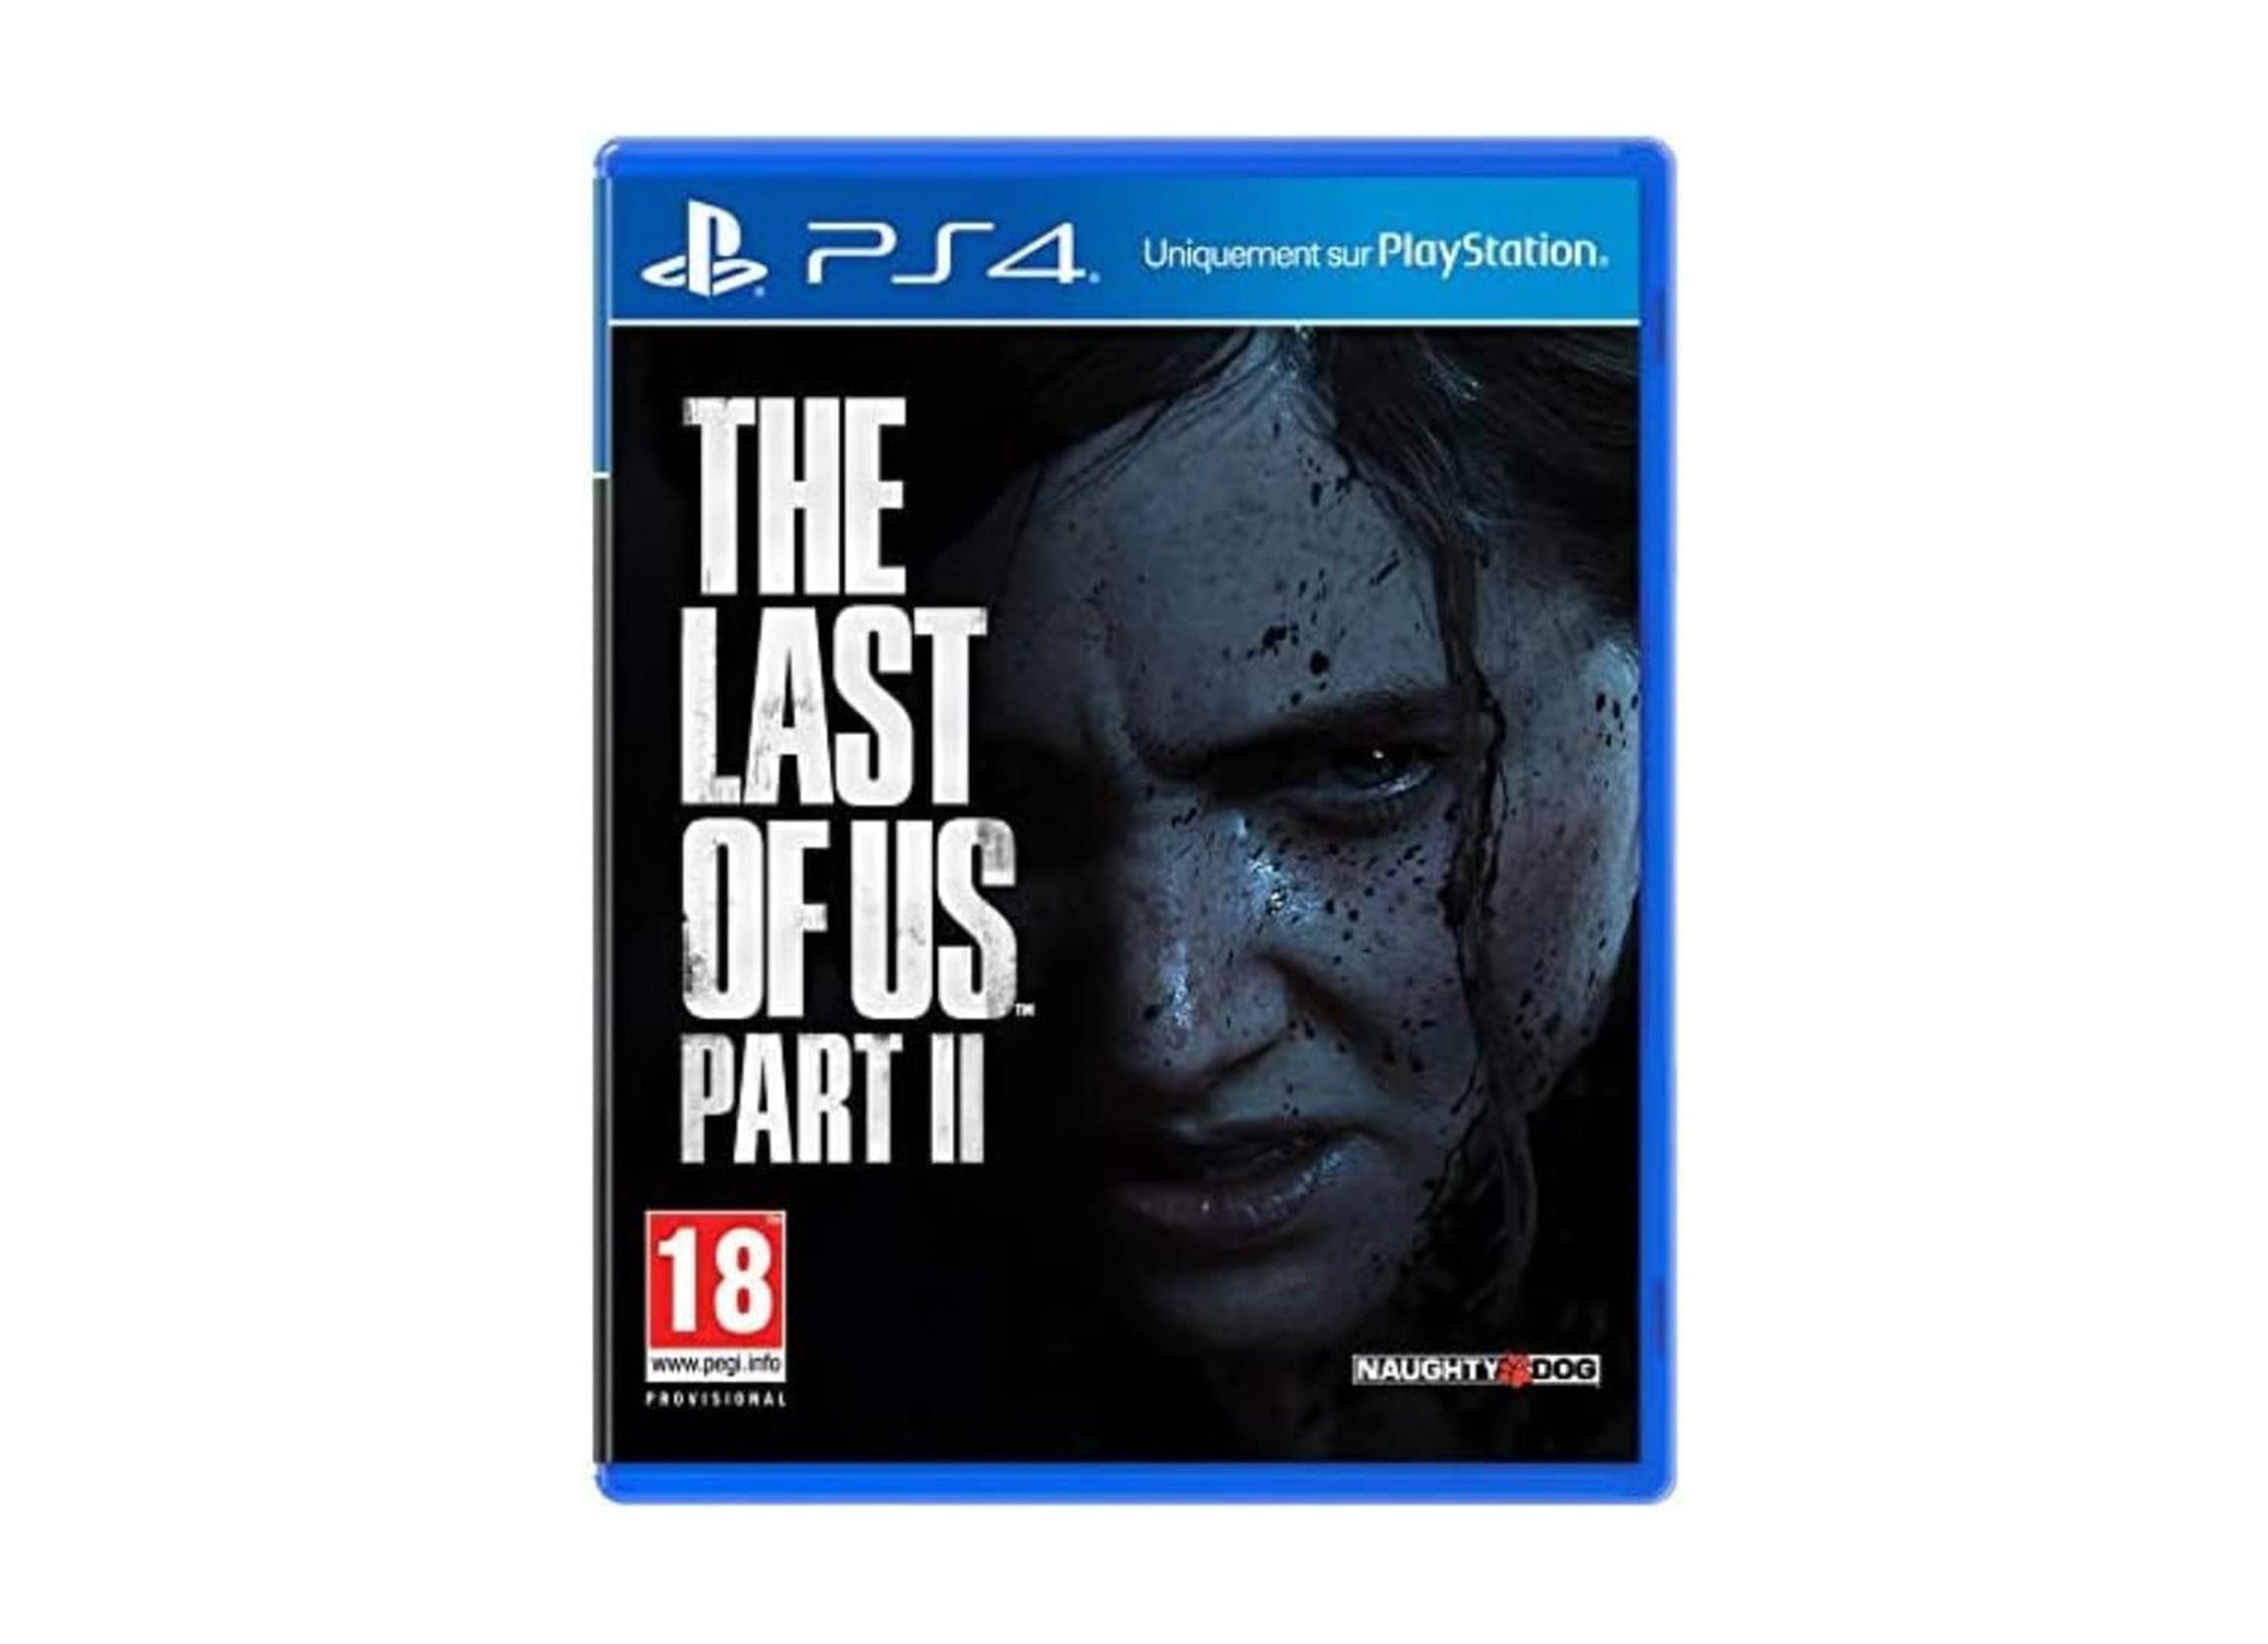 Where to watch The Last of Us episode 2 in the UK